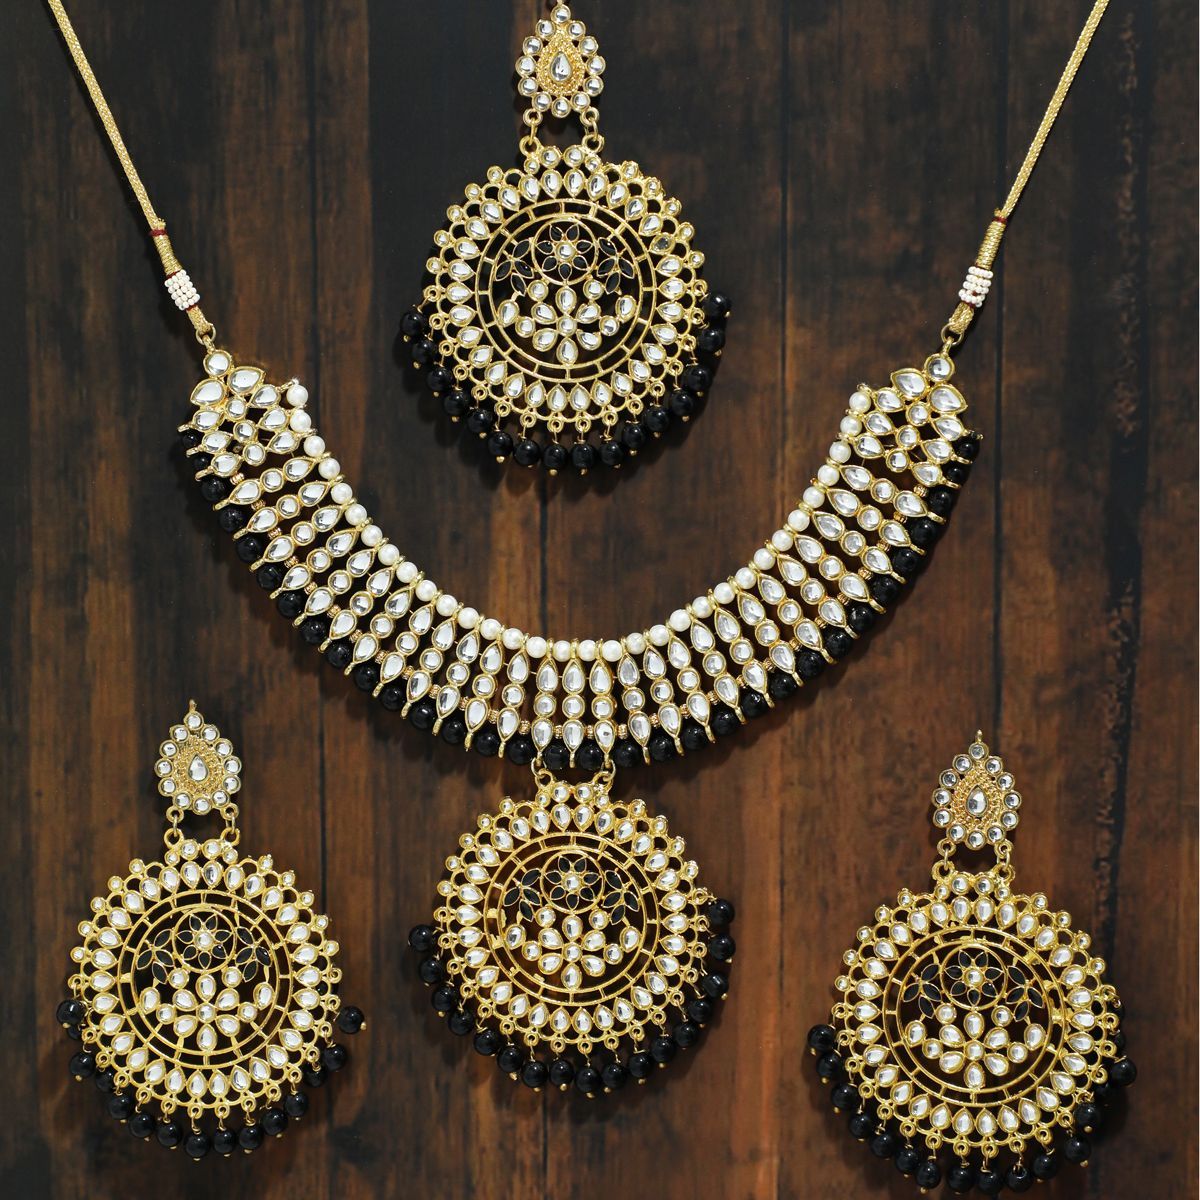 Geometric kolhapuri necklace and floral earring  set of two by Binnis  Wardrobe  The Secret Label